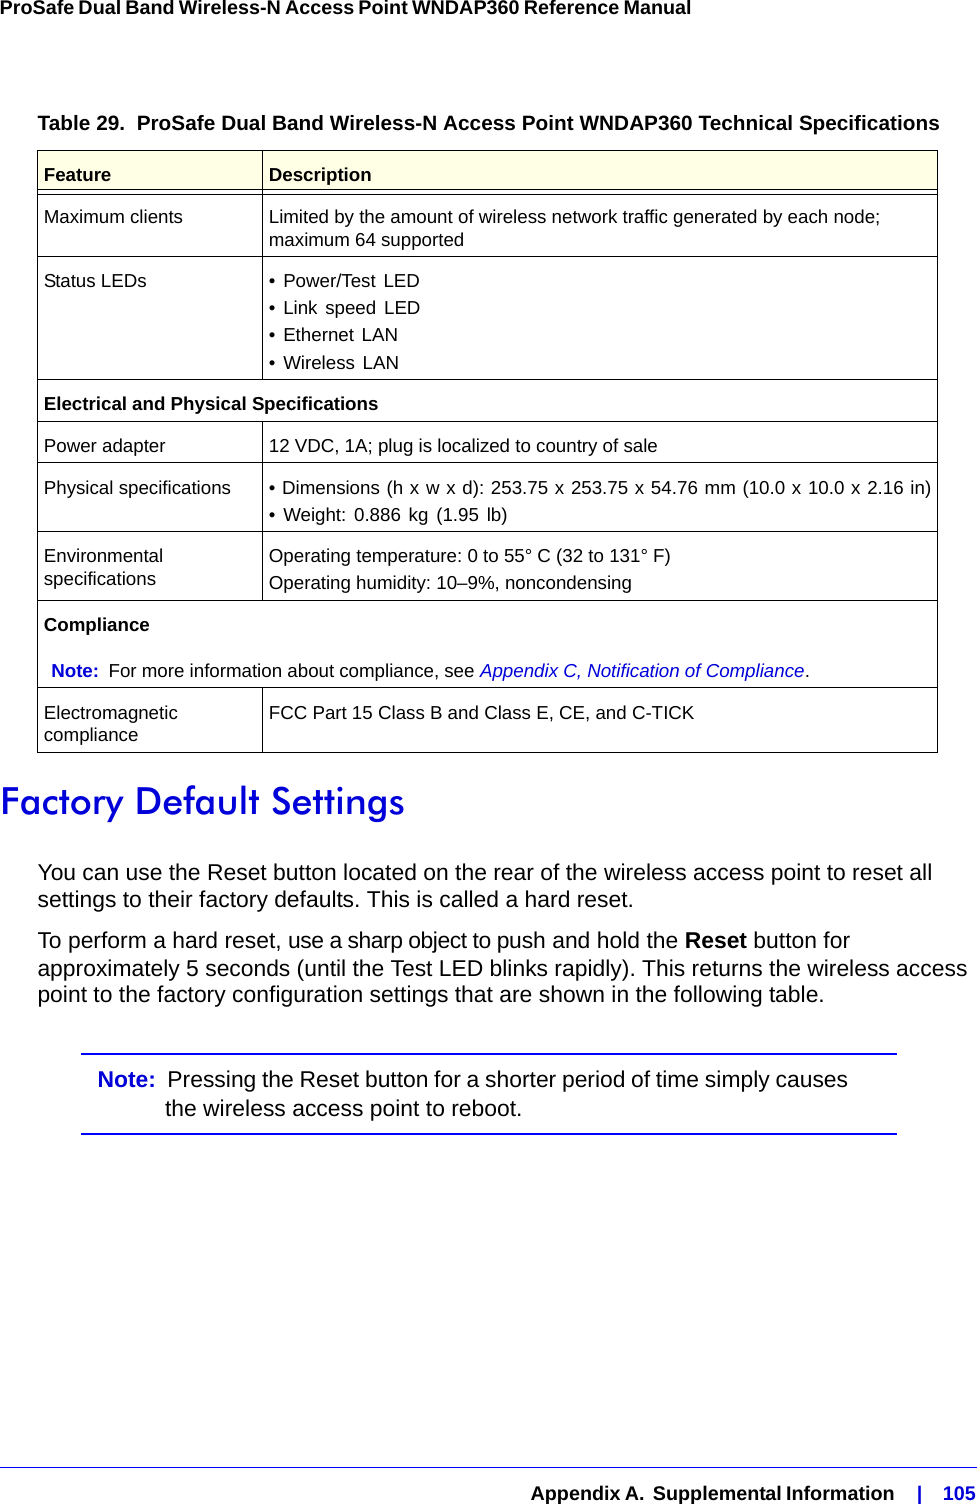   Appendix A.  Supplemental Information    |    105ProSafe Dual Band Wireless-N Access Point WNDAP360 Reference Manual Factory Default SettingsYou can use the Reset button located on the rear of the wireless access point to reset all settings to their factory defaults. This is called a hard reset. To perform a hard reset, use a sharp object to push and hold the Reset button for approximately 5 seconds (until the Test LED blinks rapidly). This returns the wireless access point to the factory configuration settings that are shown in the following table.Note:  Pressing the Reset button for a shorter period of time simply causes the wireless access point to reboot.Maximum clients Limited by the amount of wireless network traffic generated by each node; maximum 64 supportedStatus LEDs • Power/Test LED• Link speed LED• Ethernet LAN• Wireless LANElectrical and Physical SpecificationsPower adapter 12 VDC, 1A; plug is localized to country of salePhysical specifications • Dimensions (h x w x d): 253.75 x 253.75 x 54.76 mm (10.0 x 10.0 x 2.16 in)• Weight: 0.886 kg (1.95 lb)Environmental specifications Operating temperature: 0 to 55° C (32 to 131° F)Operating humidity: 10–9%, noncondensingComplianceNote: For more information about compliance, see Appendix C, Notification of Compliance.Electromagnetic compliance FCC Part 15 Class B and Class E, CE, and C-TICKTable 29.  ProSafe Dual Band Wireless-N Access Point WNDAP360 Technical SpecificationsFeature Description